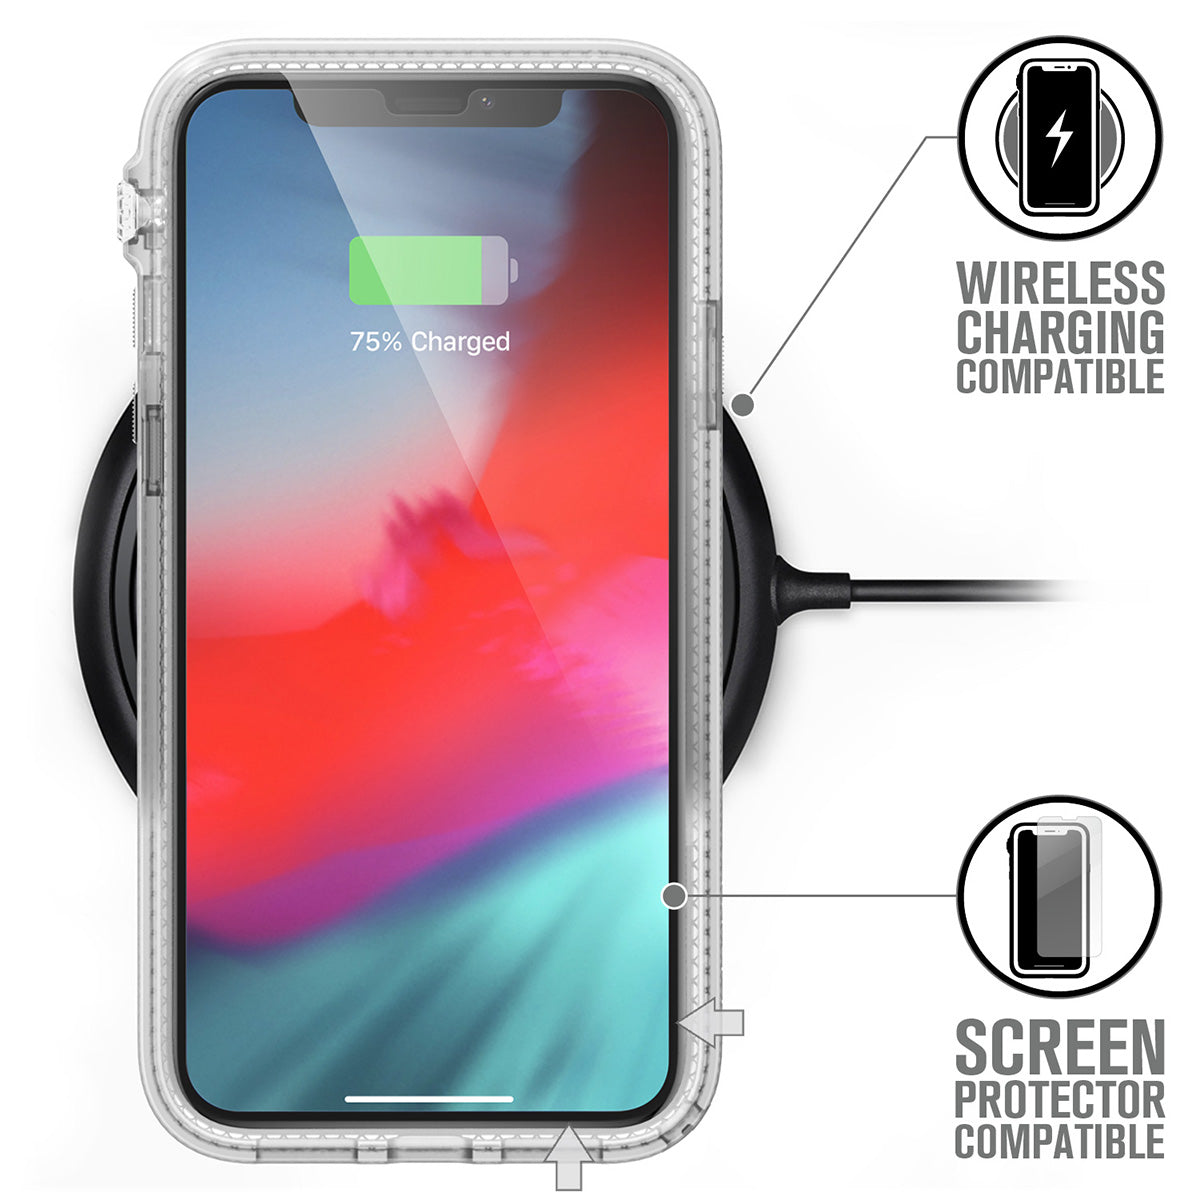 Buy CATALYST Impact Protection Case for iPhone XR